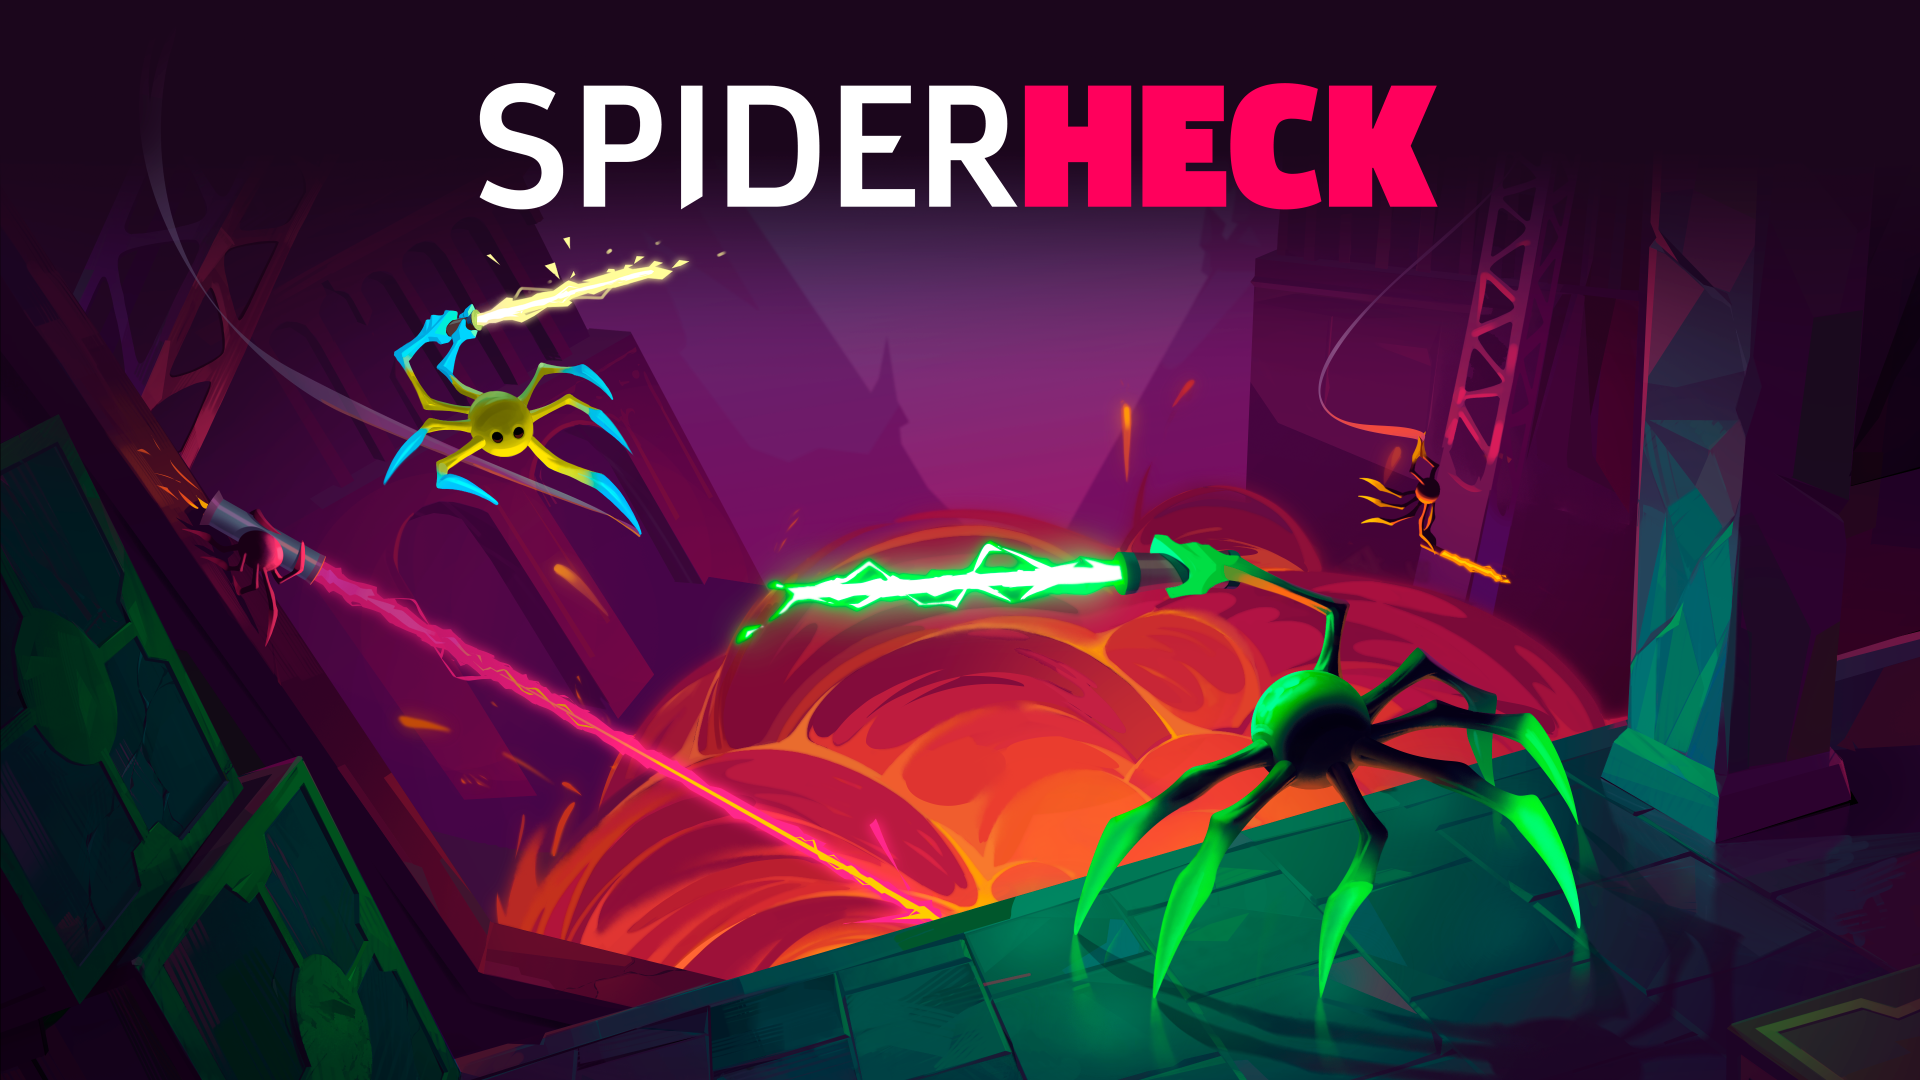 Two spiders with particle swords from Spiderheck